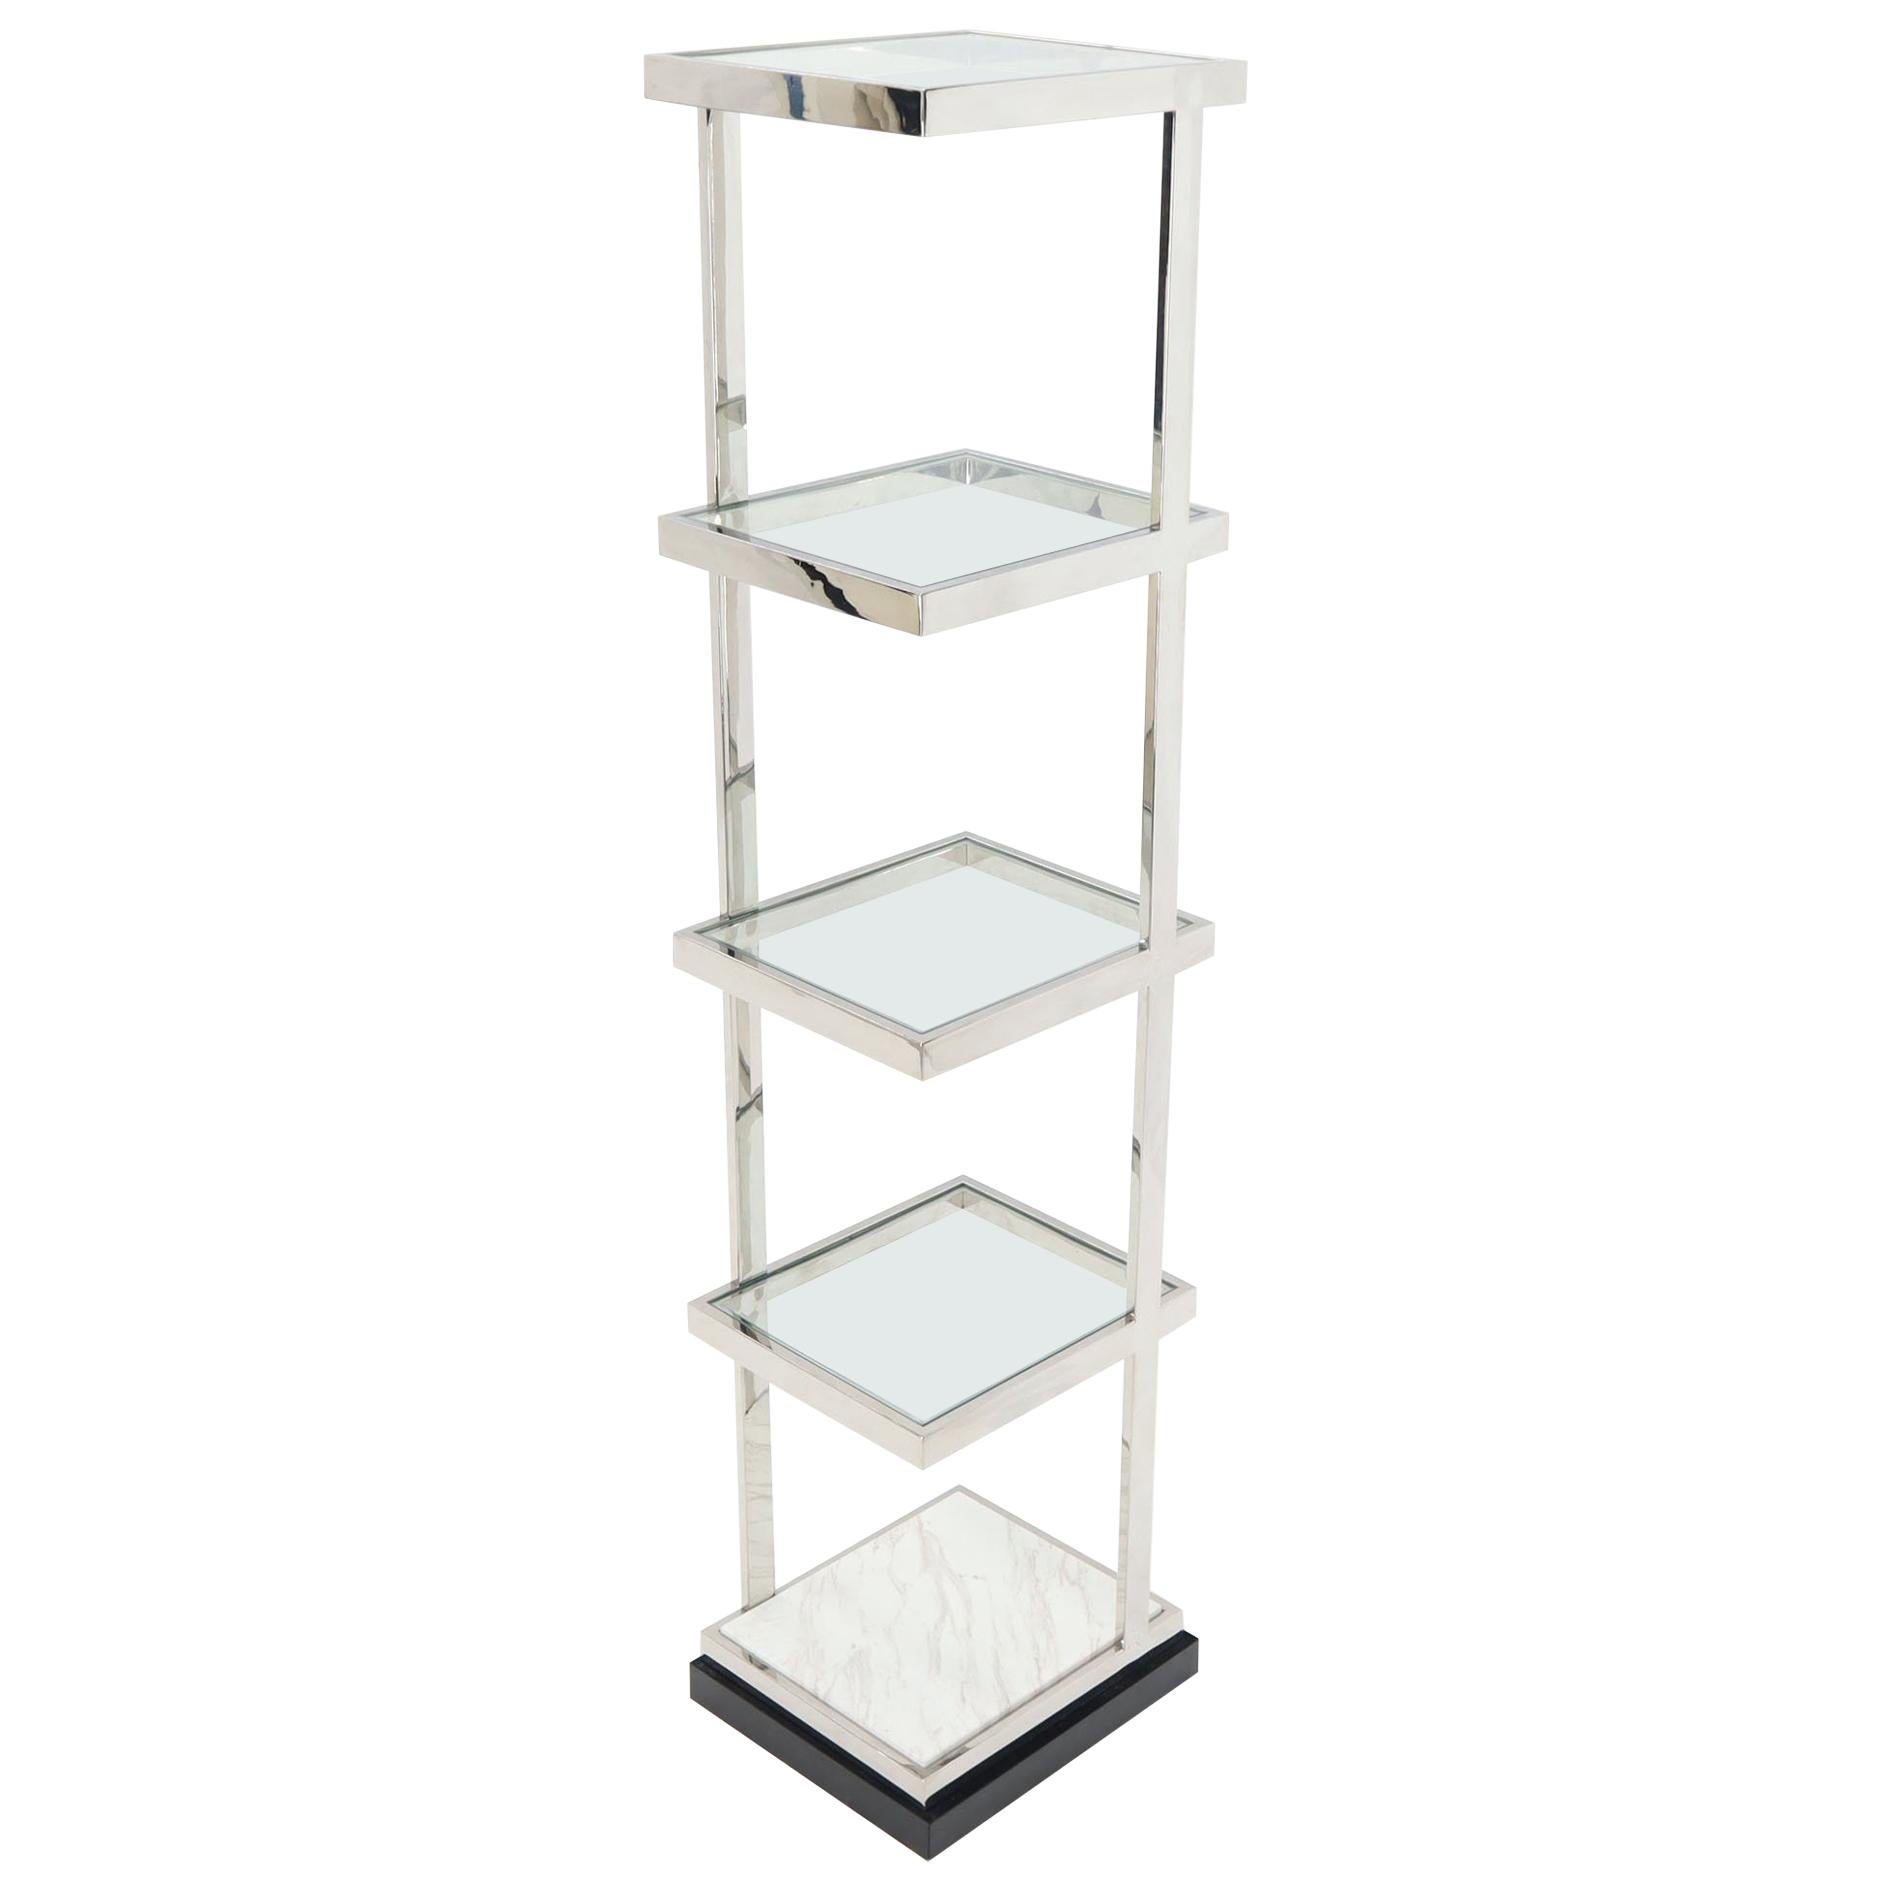 Fine Polished Stainless Steel Compact Small Tower Shape Étagère Shelf Marble